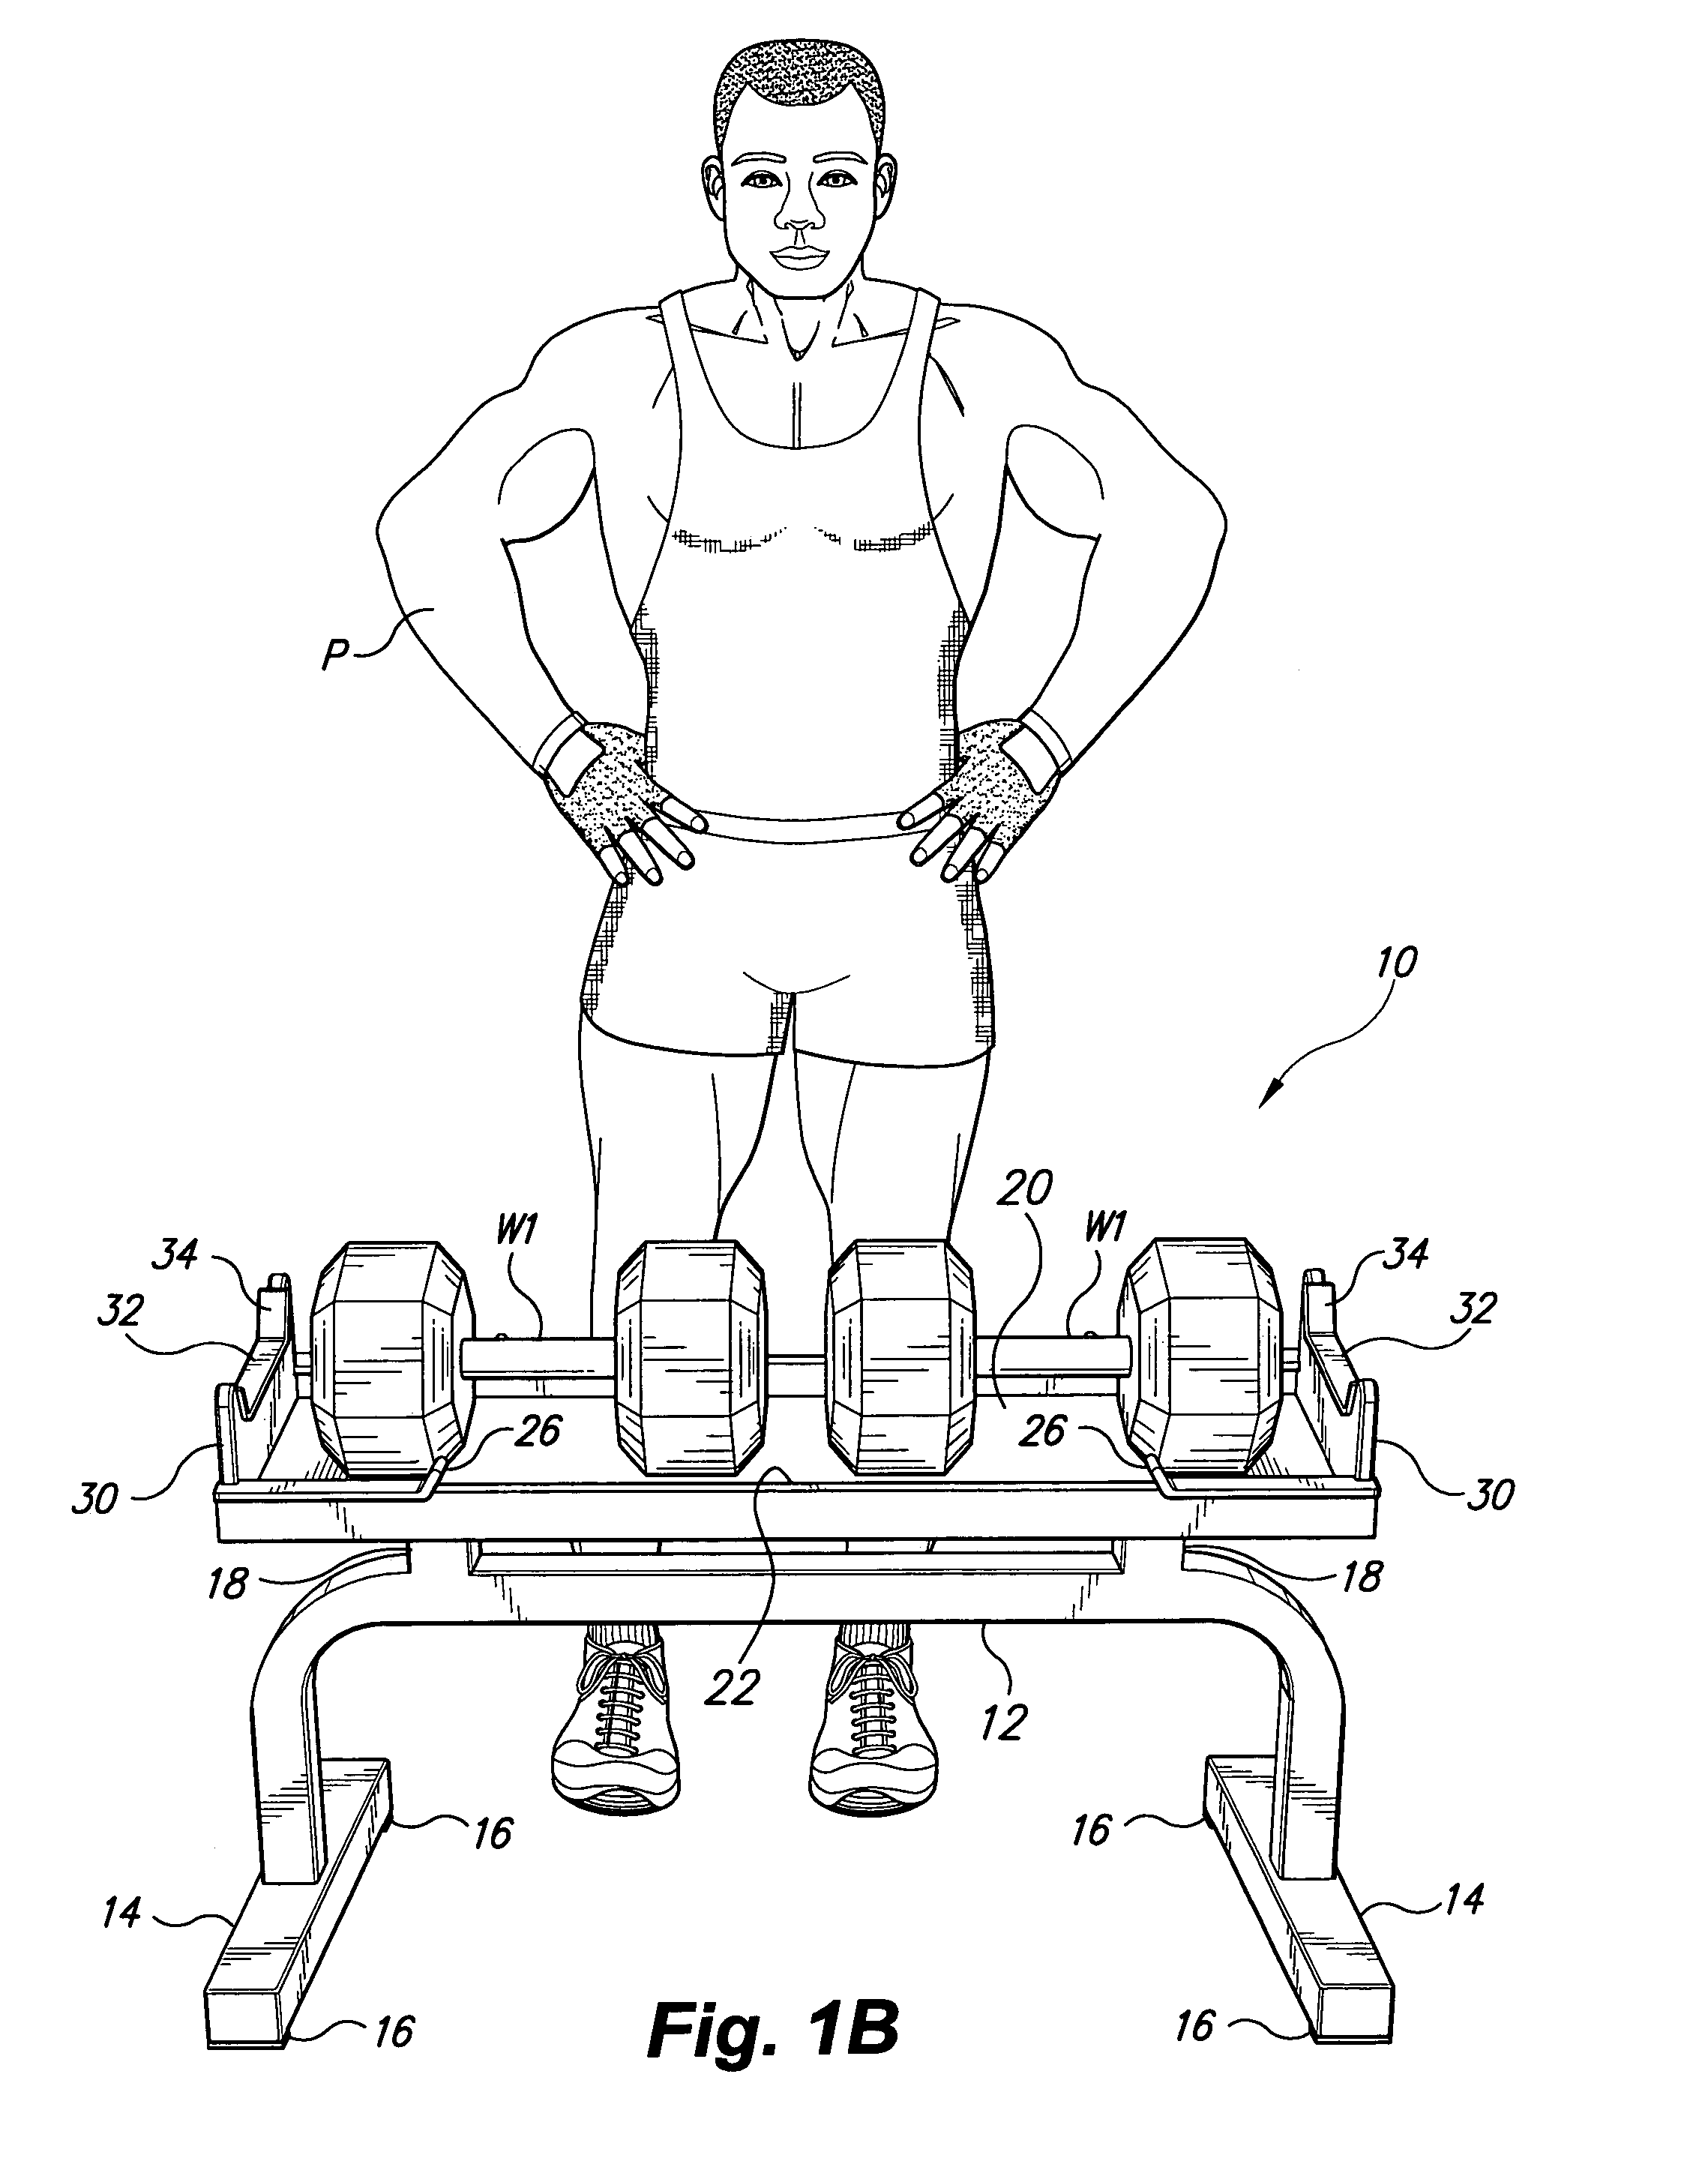 Barbell/dumbbell training support device